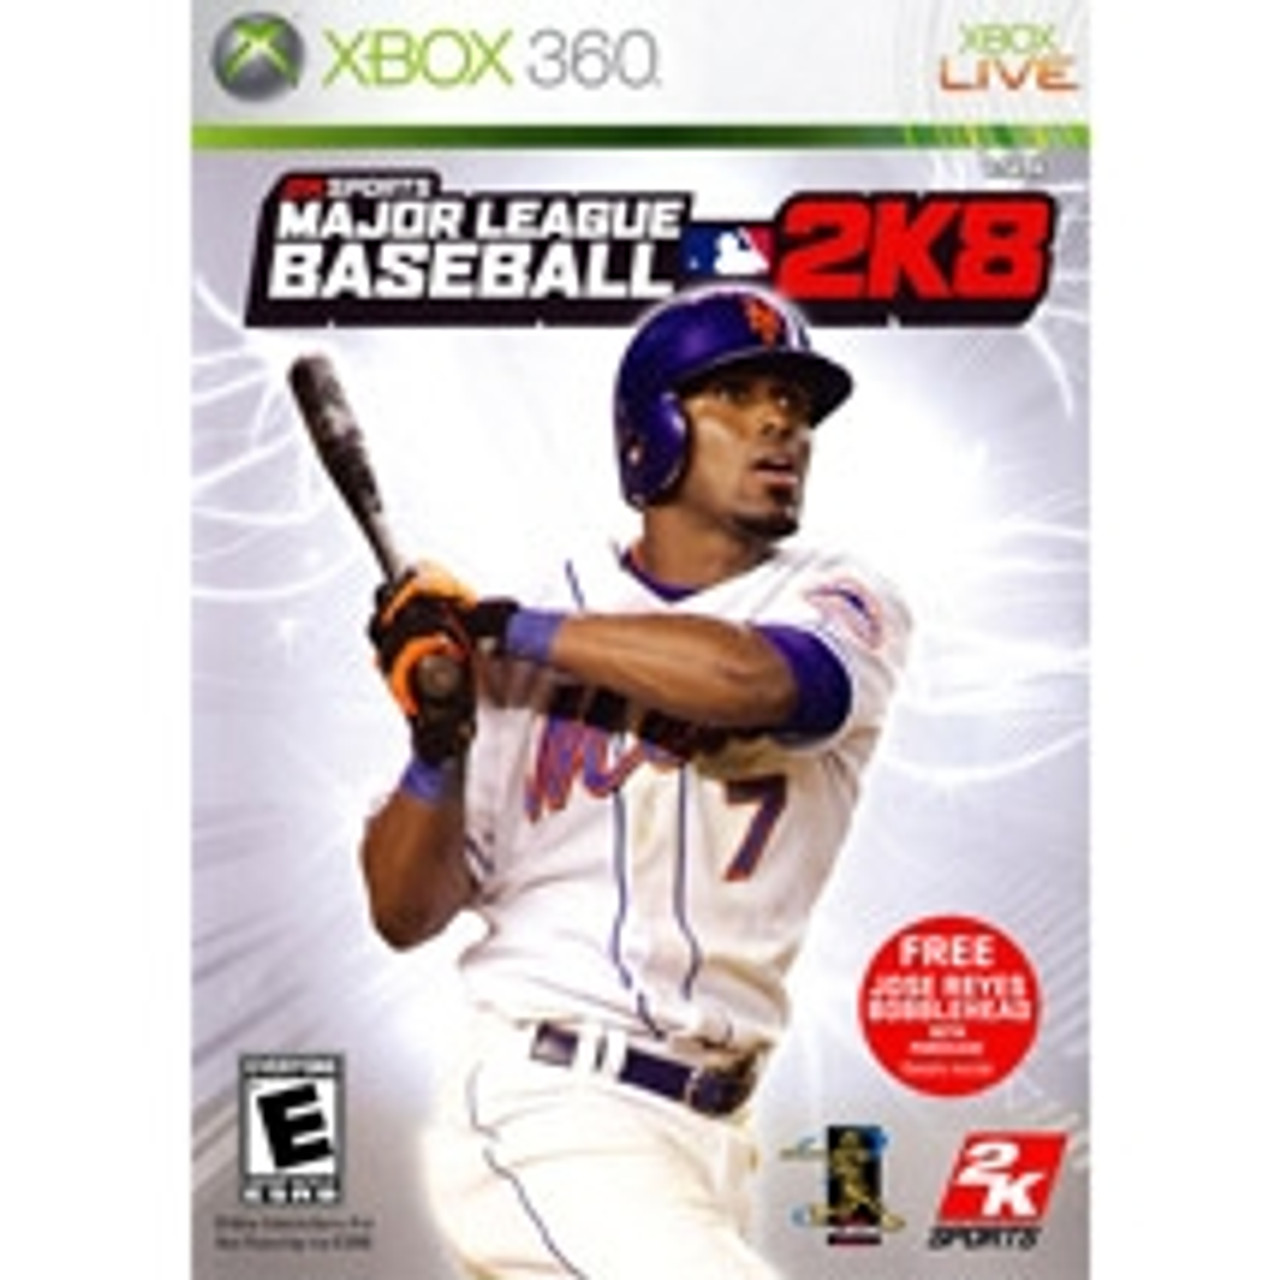 MLB 2K8 XBox 360 Game For Sale DKOldies